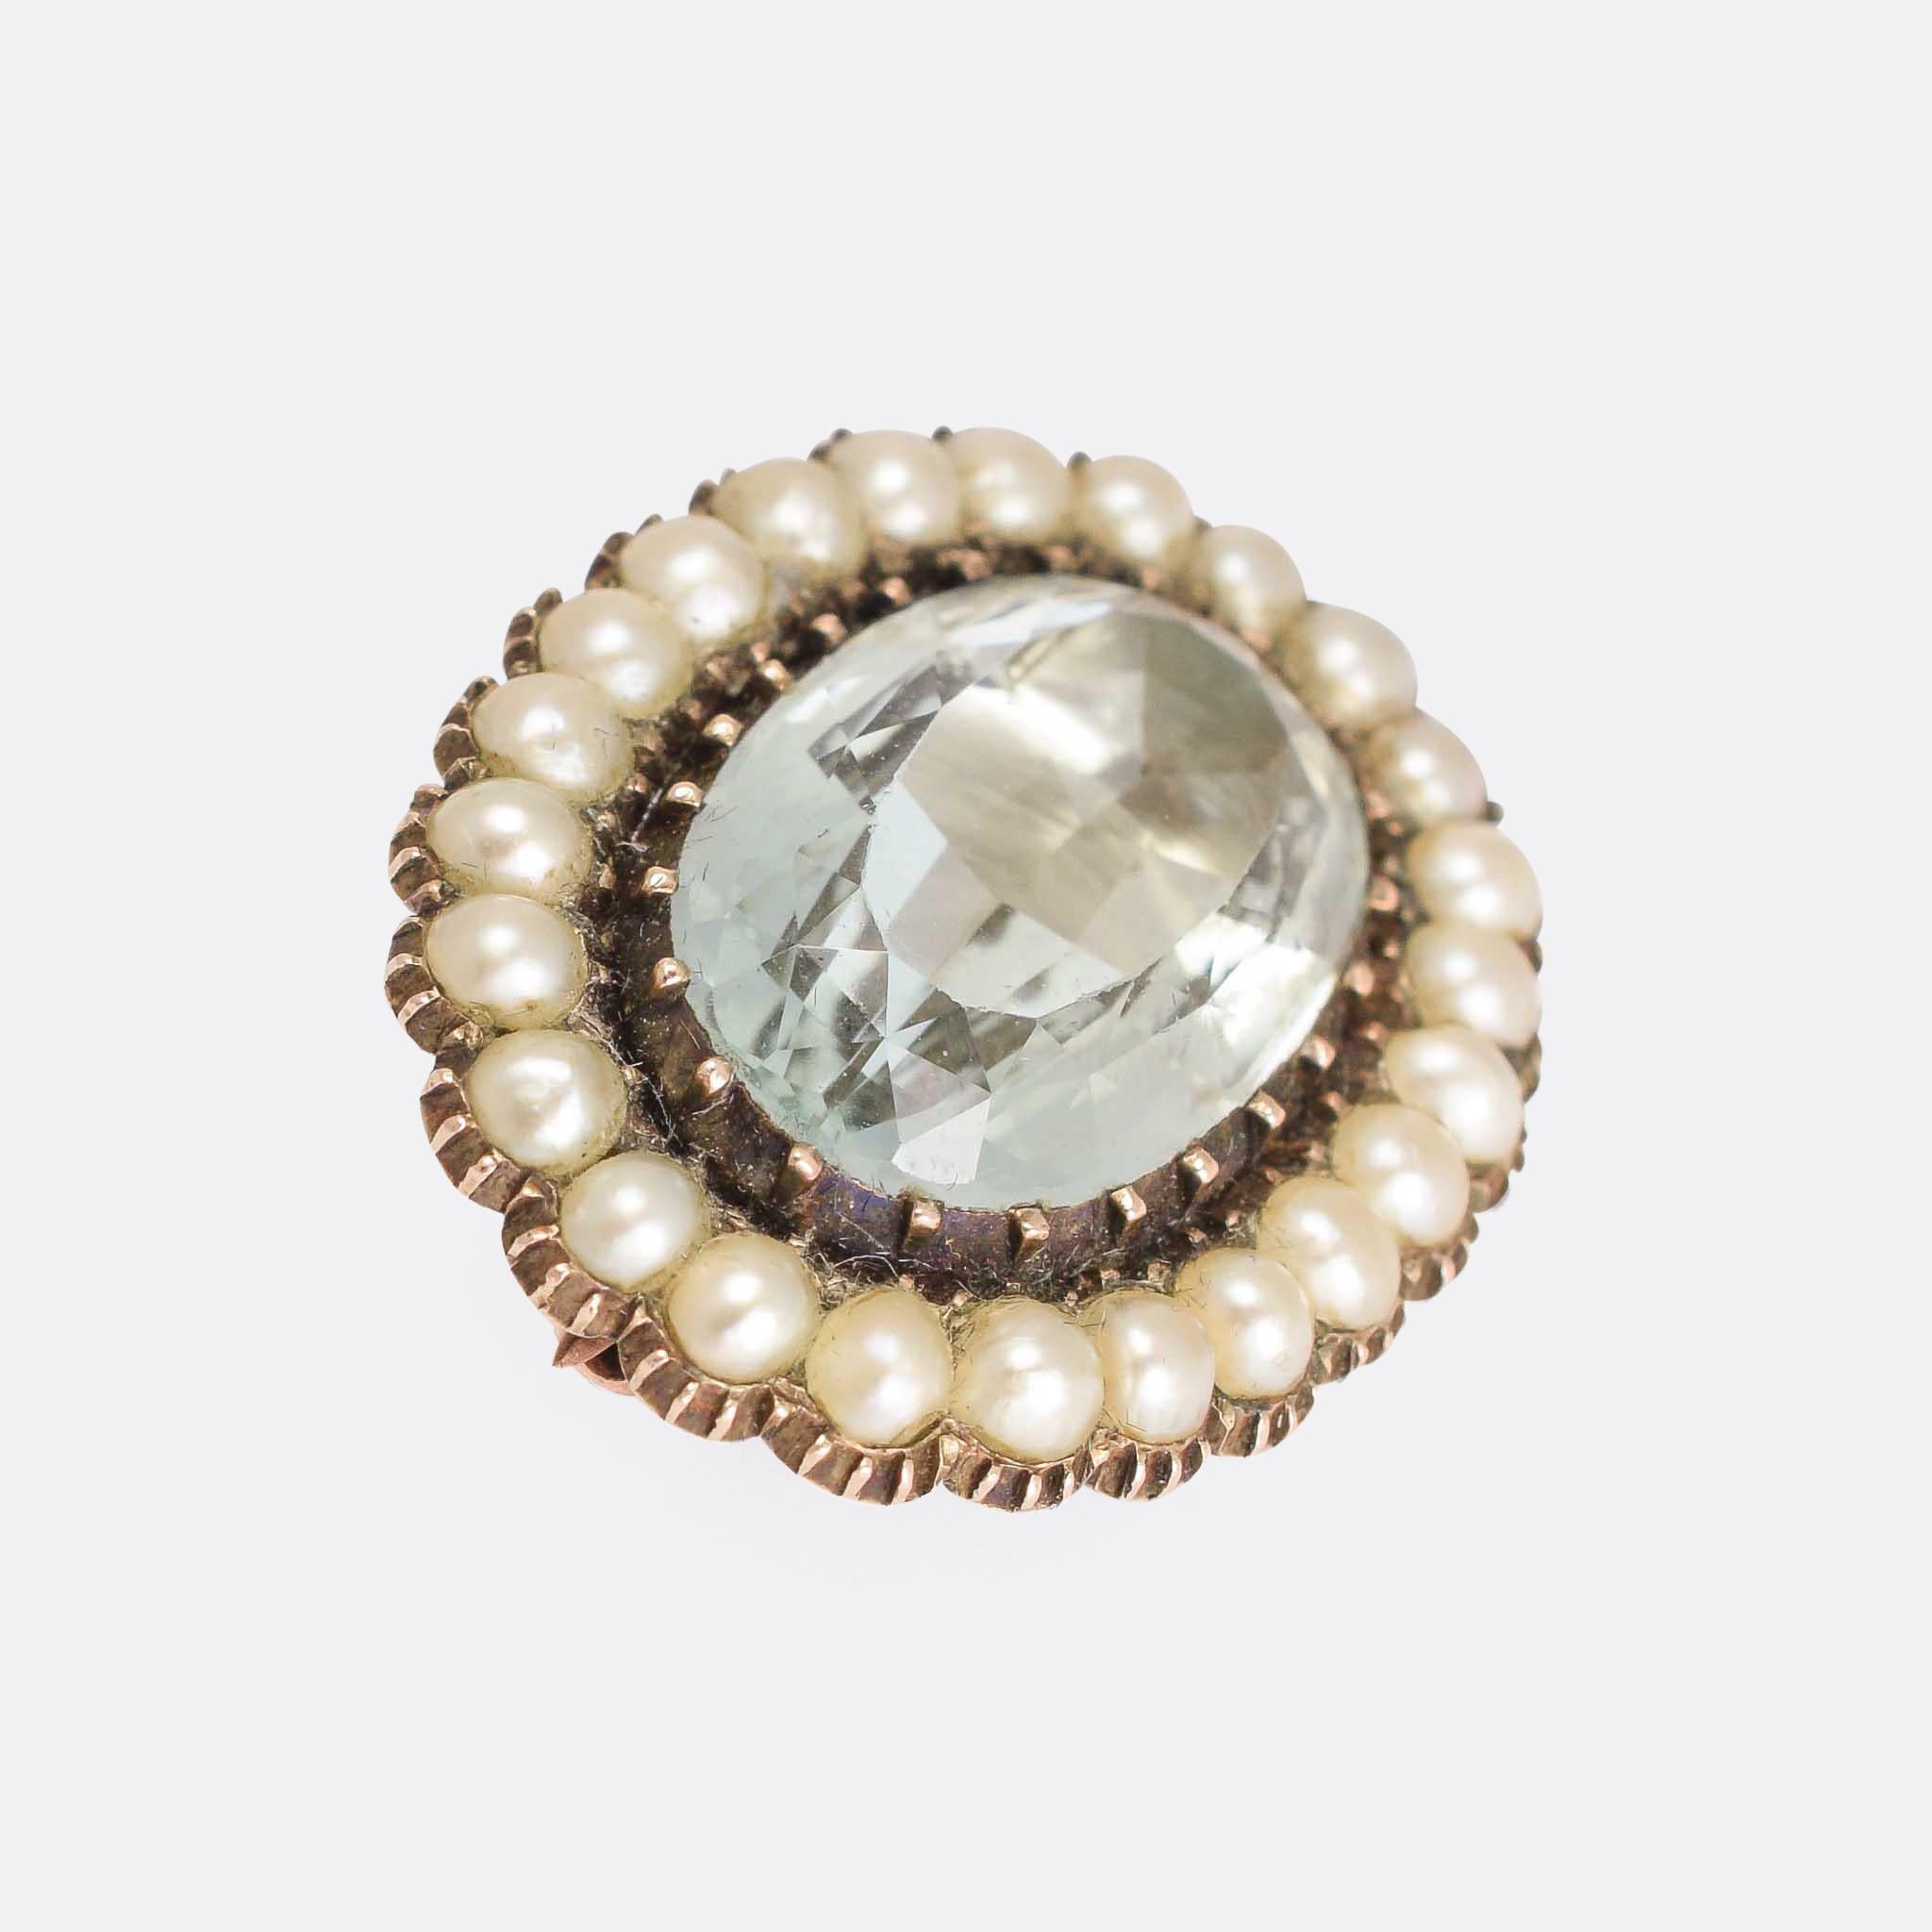 A gorgeous Georgian brooch set with with a lovely combination of stones: a principal faceted aquamarine within a halo of natural pearls. The aquamarine is foil-backed, making it glow brightly in the light. Modelled in 15k gold throughout, the piece